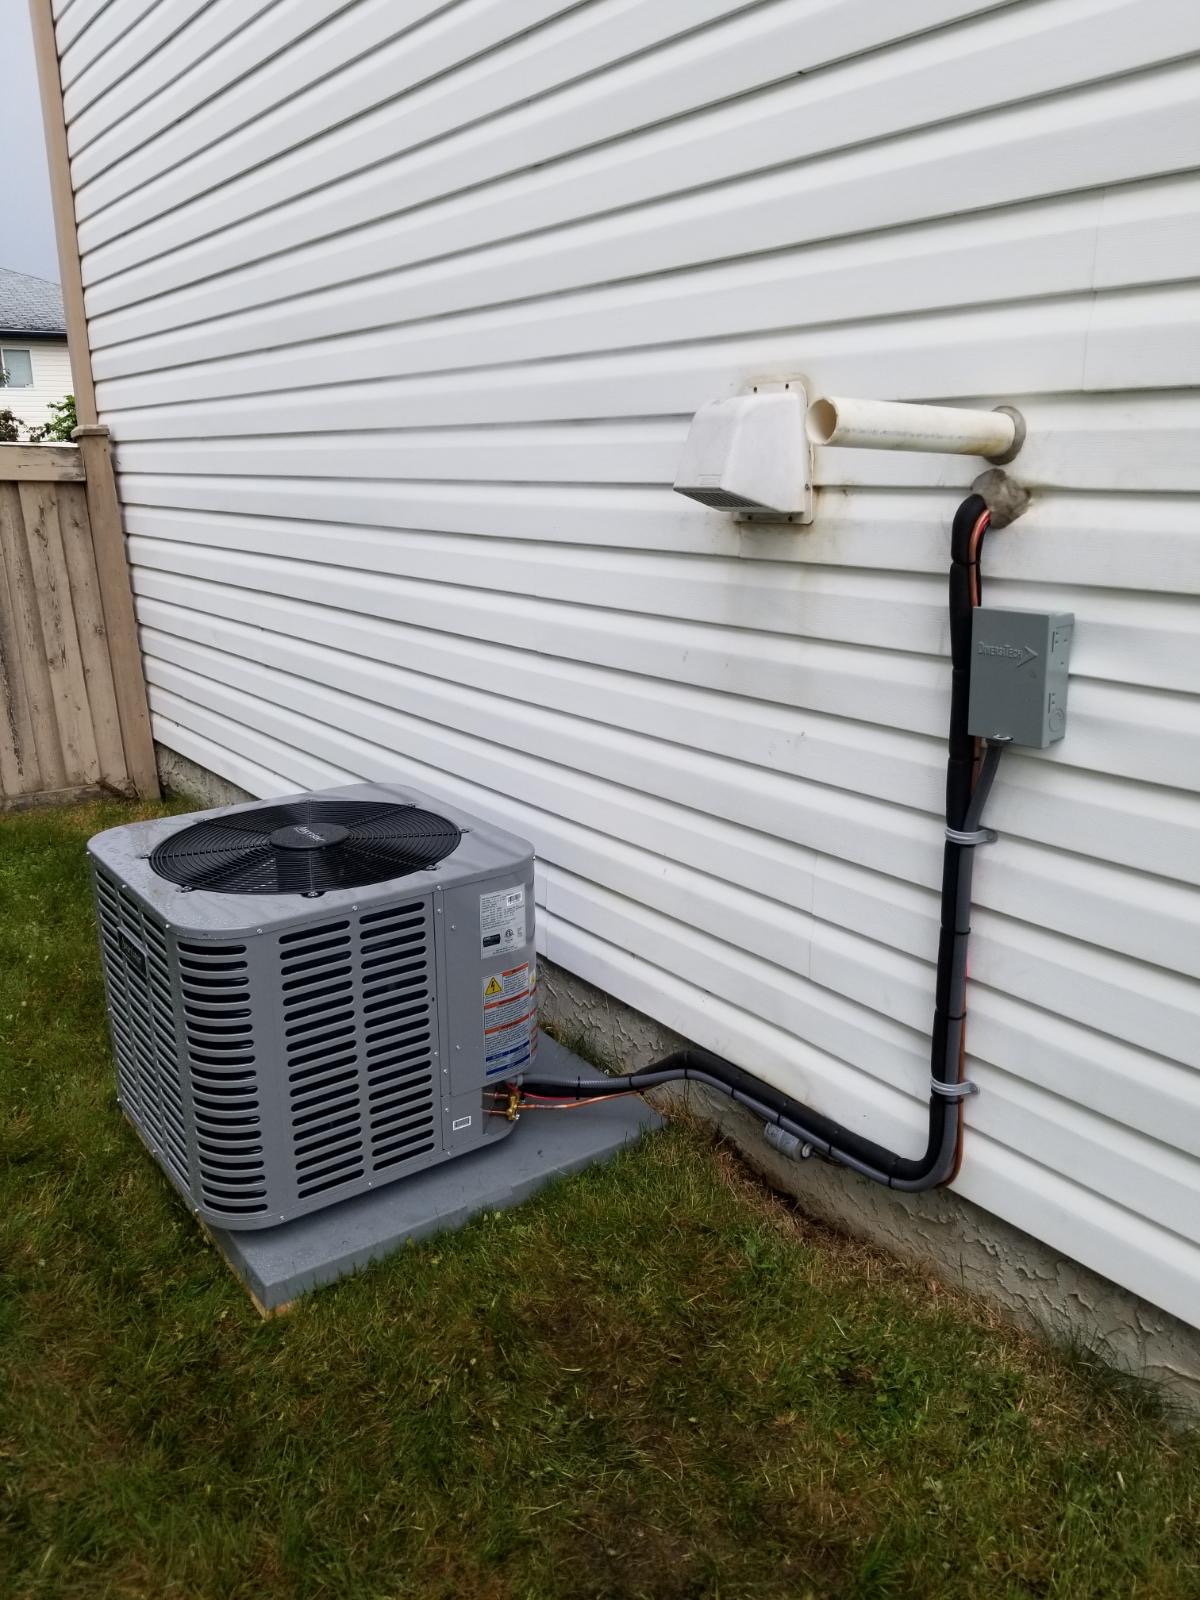 Furnace Replacement & New Central A/C Install - Rapid Refrigeration ...